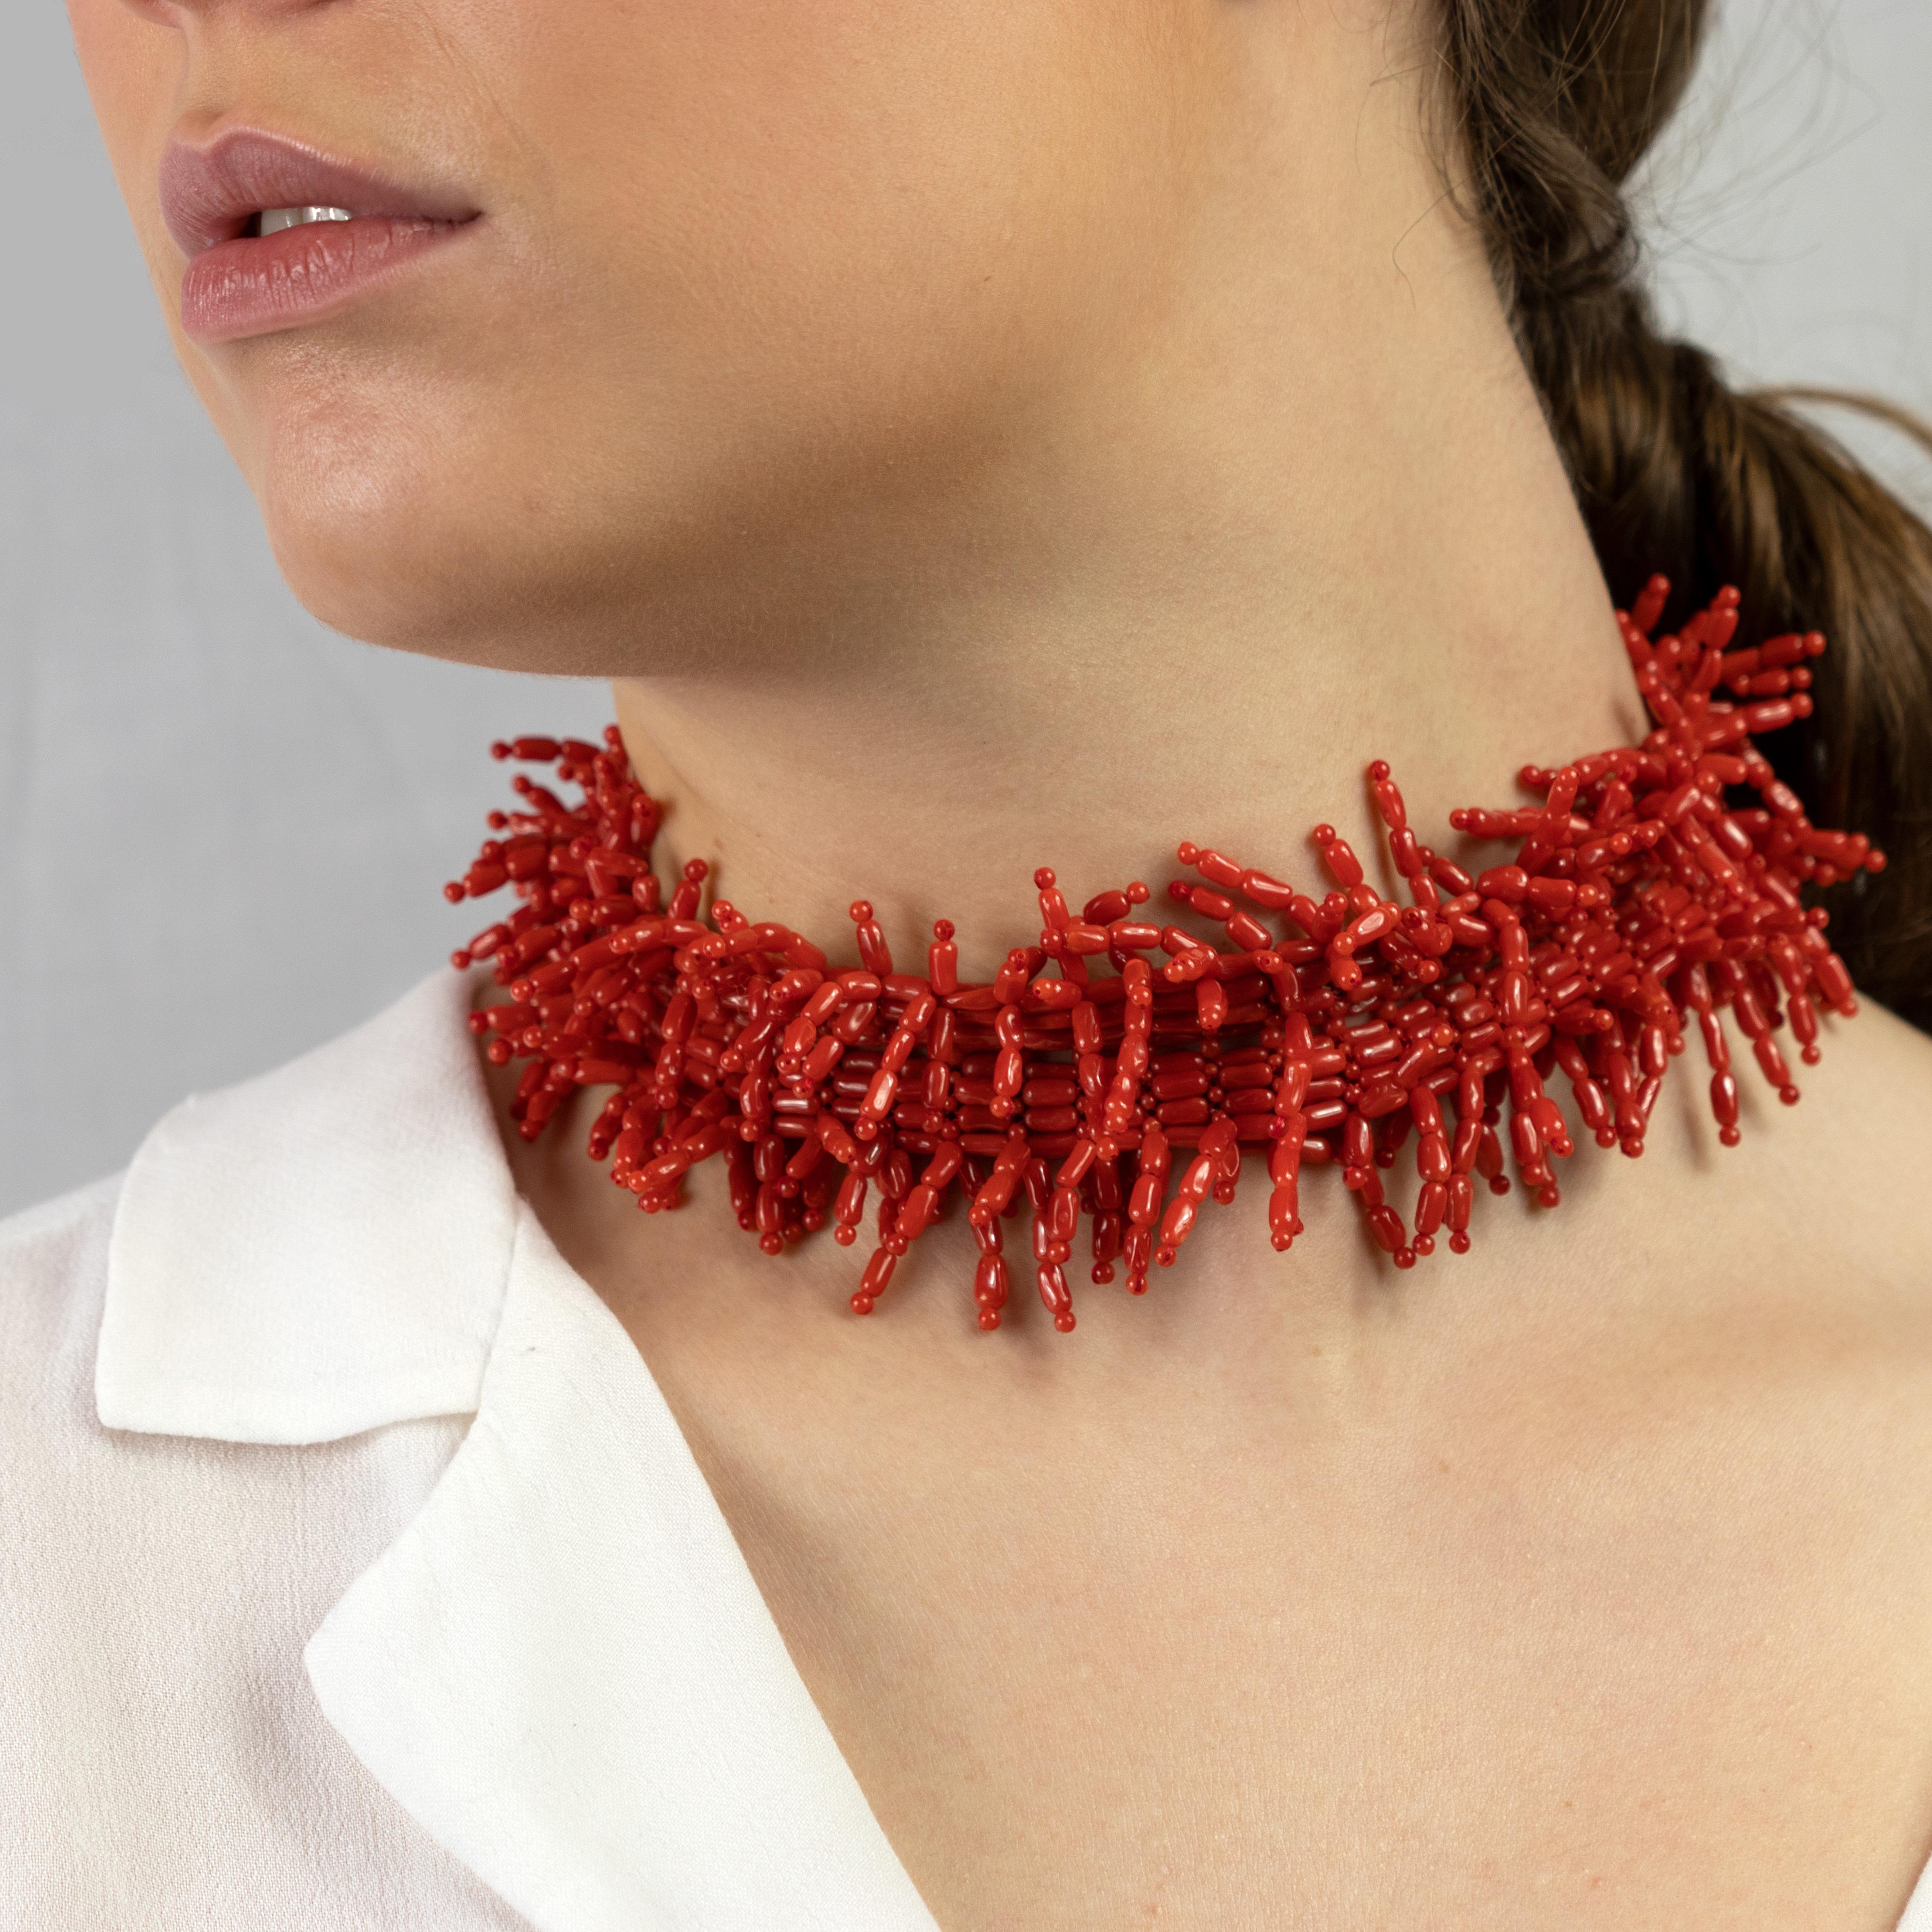 This trendy and fashionable red coral tuft necklace is perfect as gift for your loved ones or just for you. You can wear it everyday and it will absolutely add a stylish finishing touch to your look. Lightweight and very comfortable to wear, great